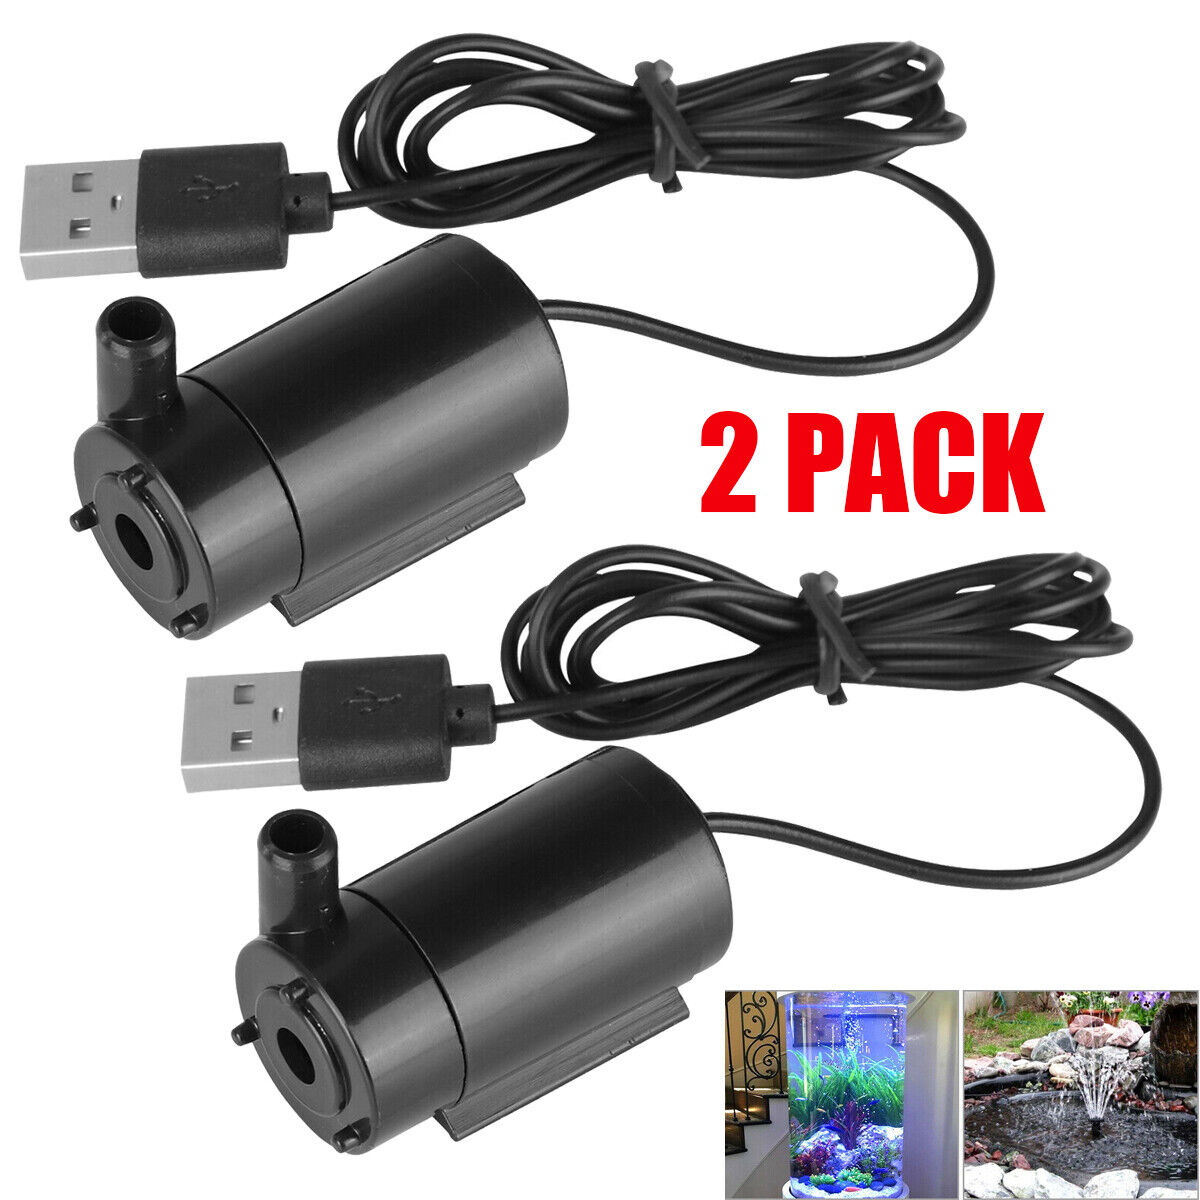 2PC Water Pump Mini Mute Submersible USB 1M Cable Garden Fountain Tool Fish Tank Unbranded